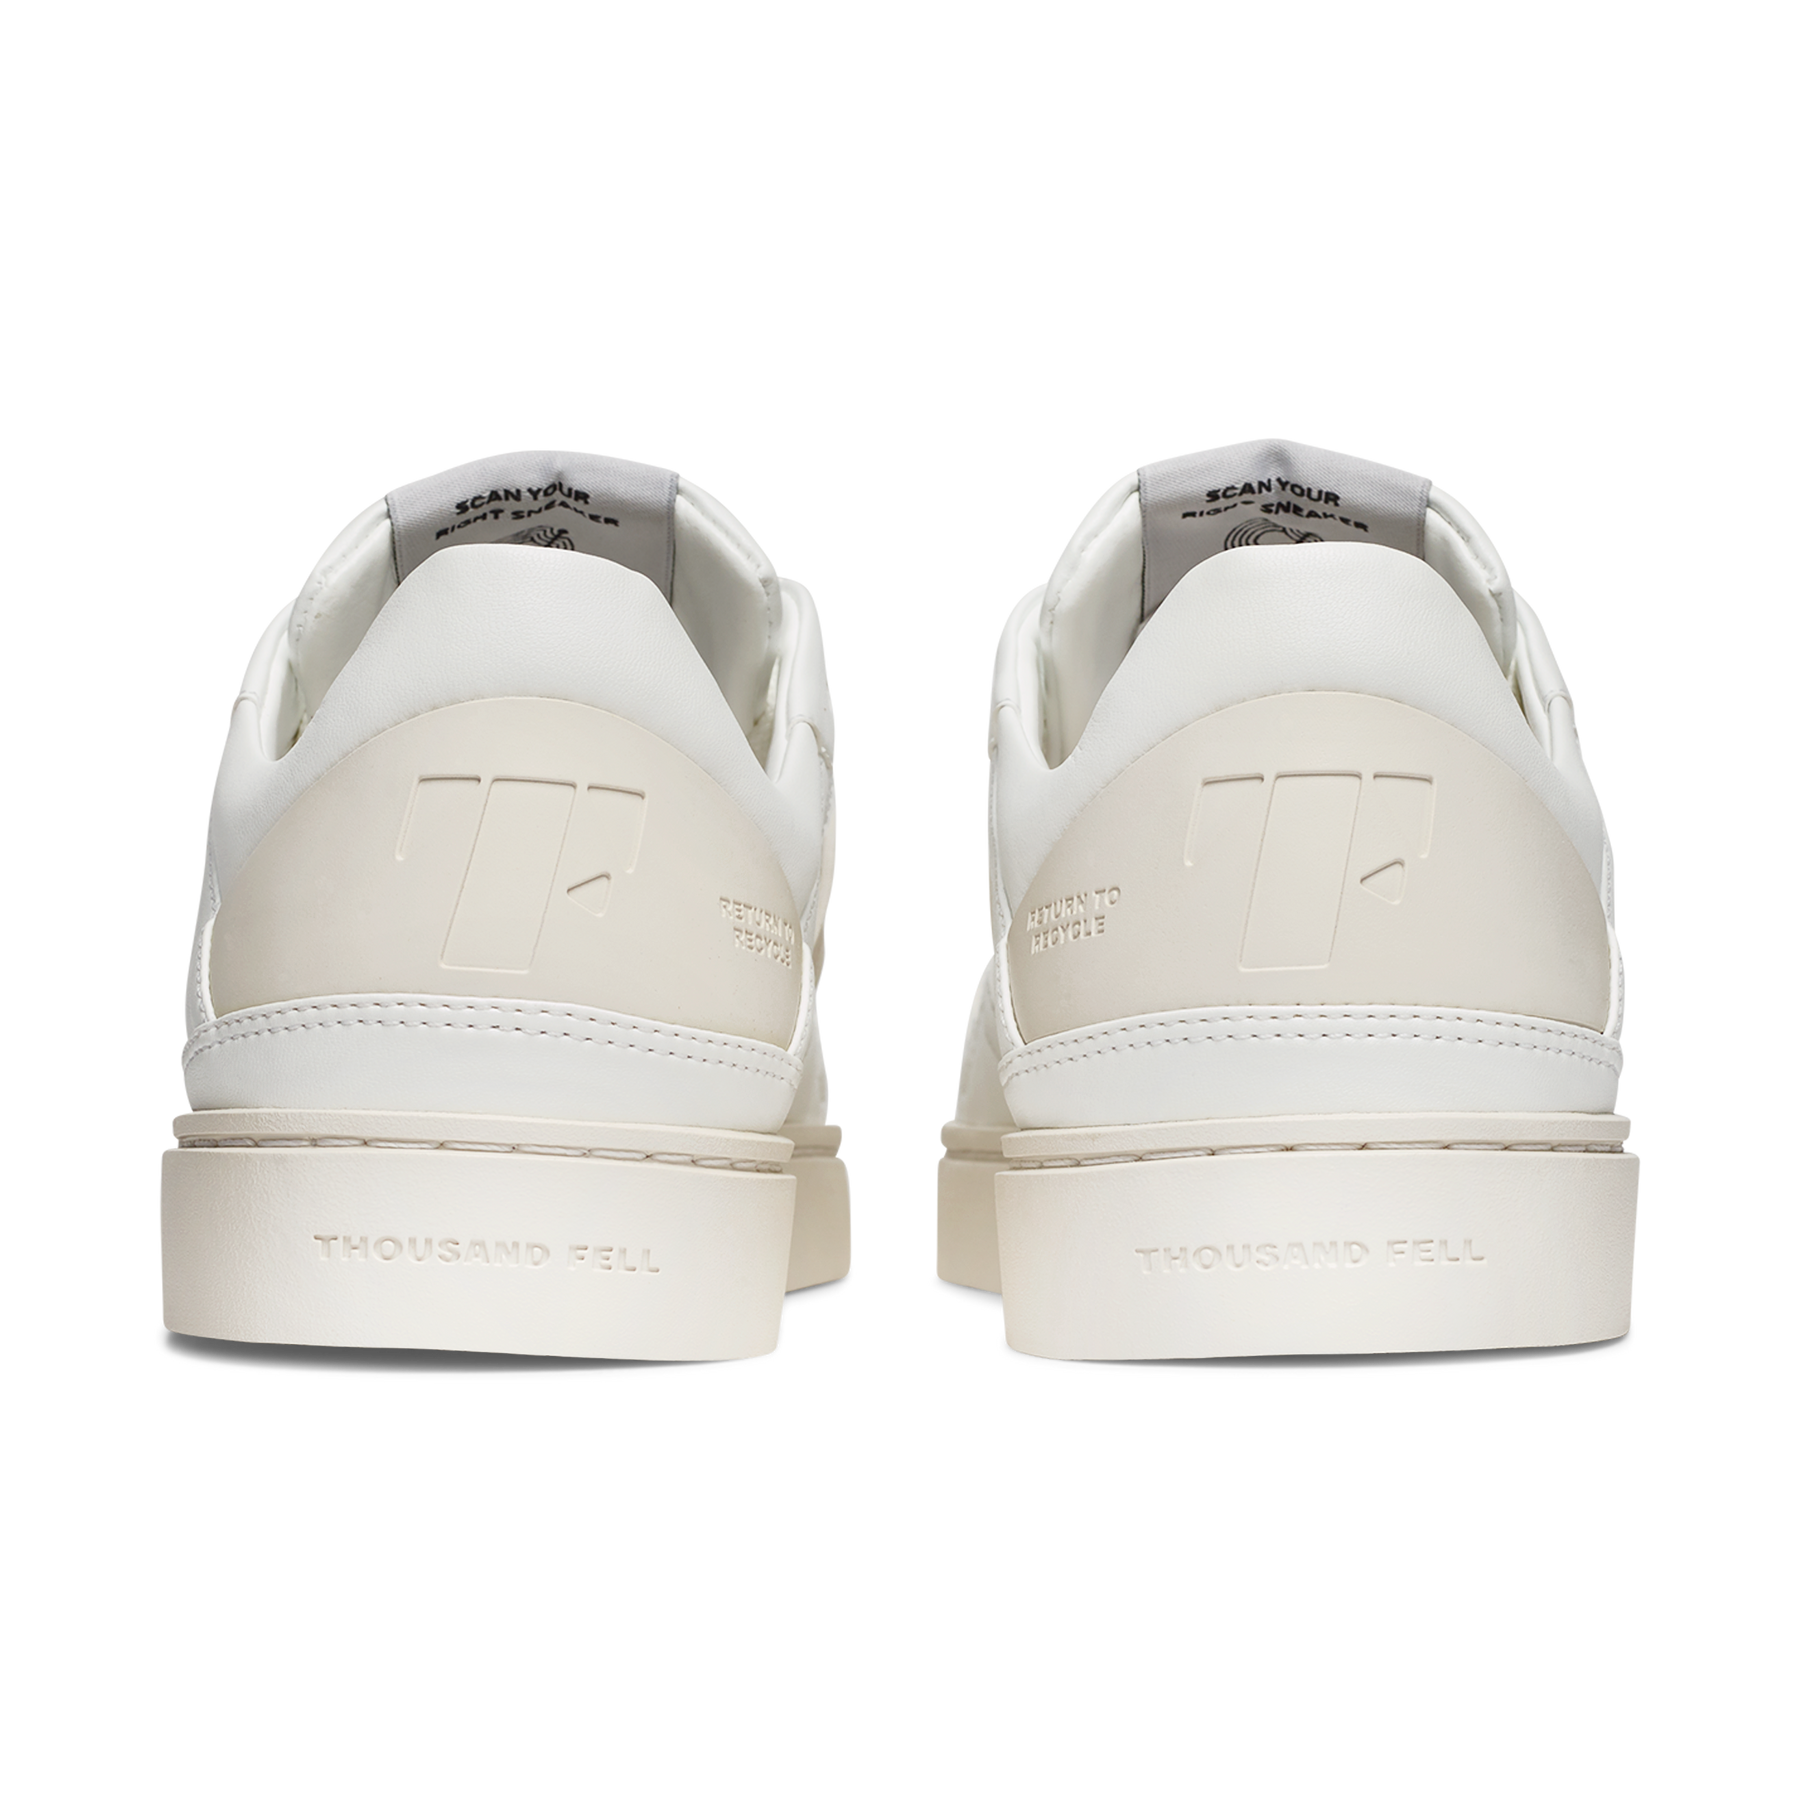 back view of white eco friendly sneakers inspired by nike court shoes